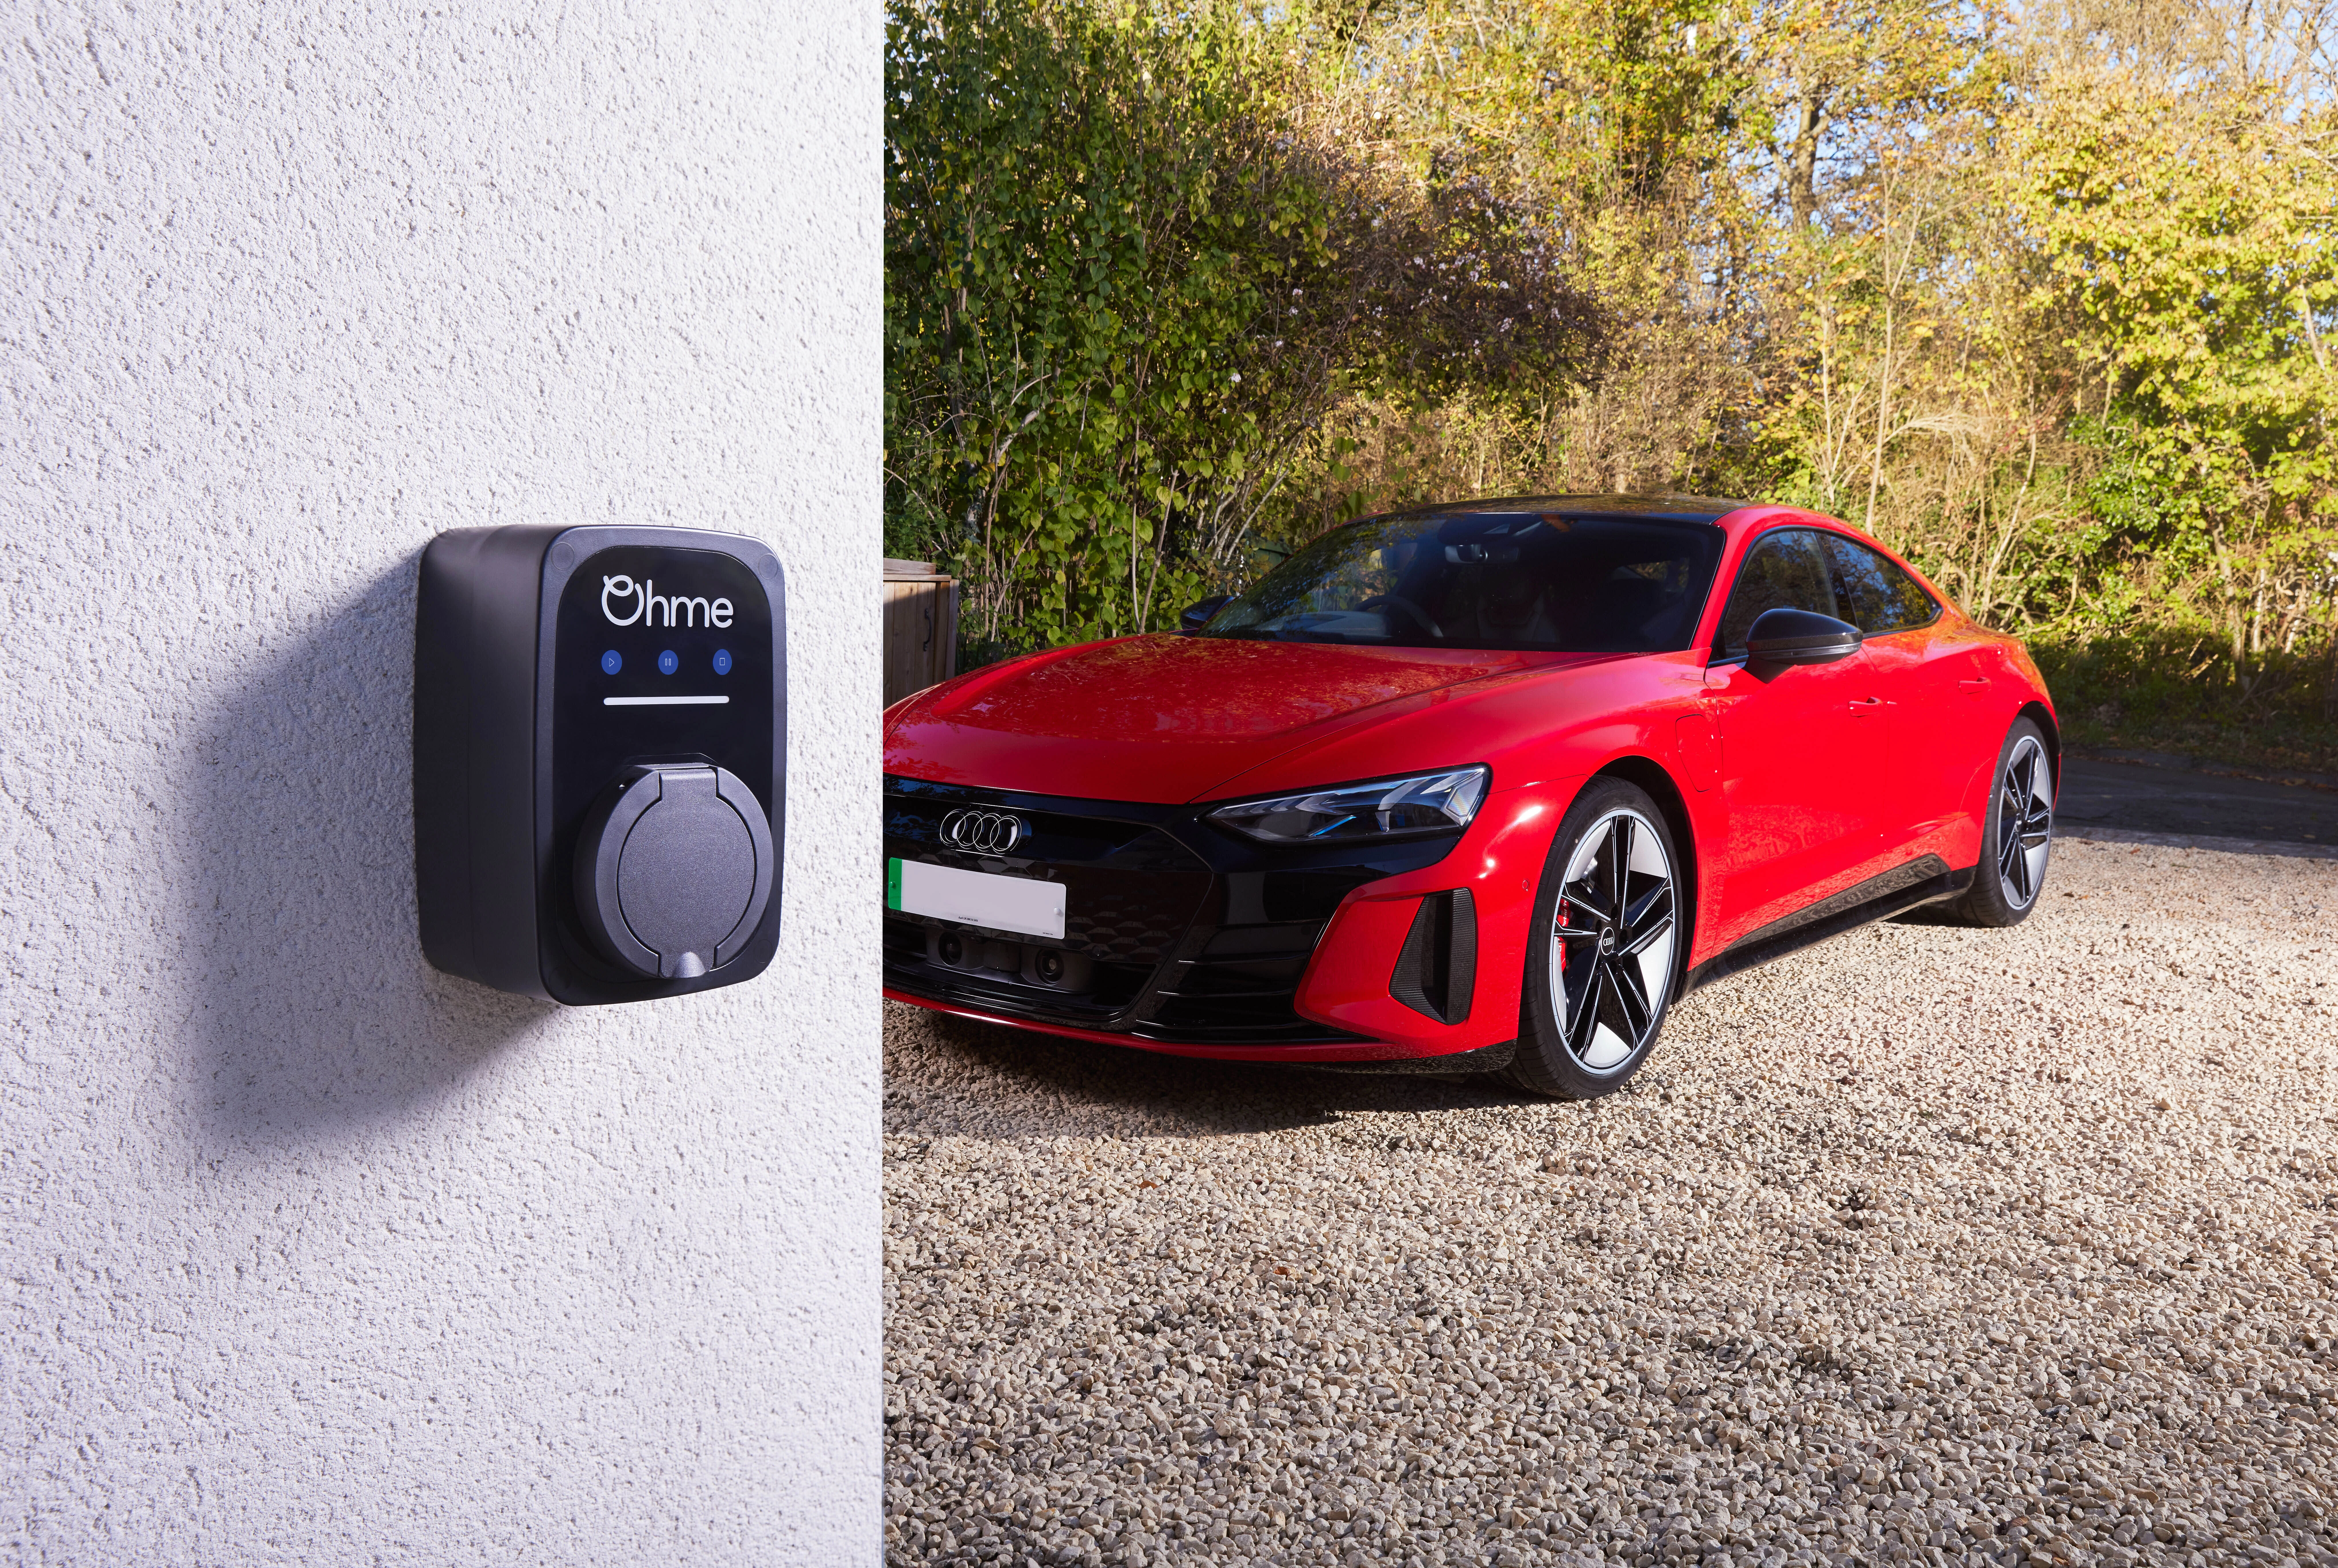 Audi e-Tron GT with Ohme ePod home charger